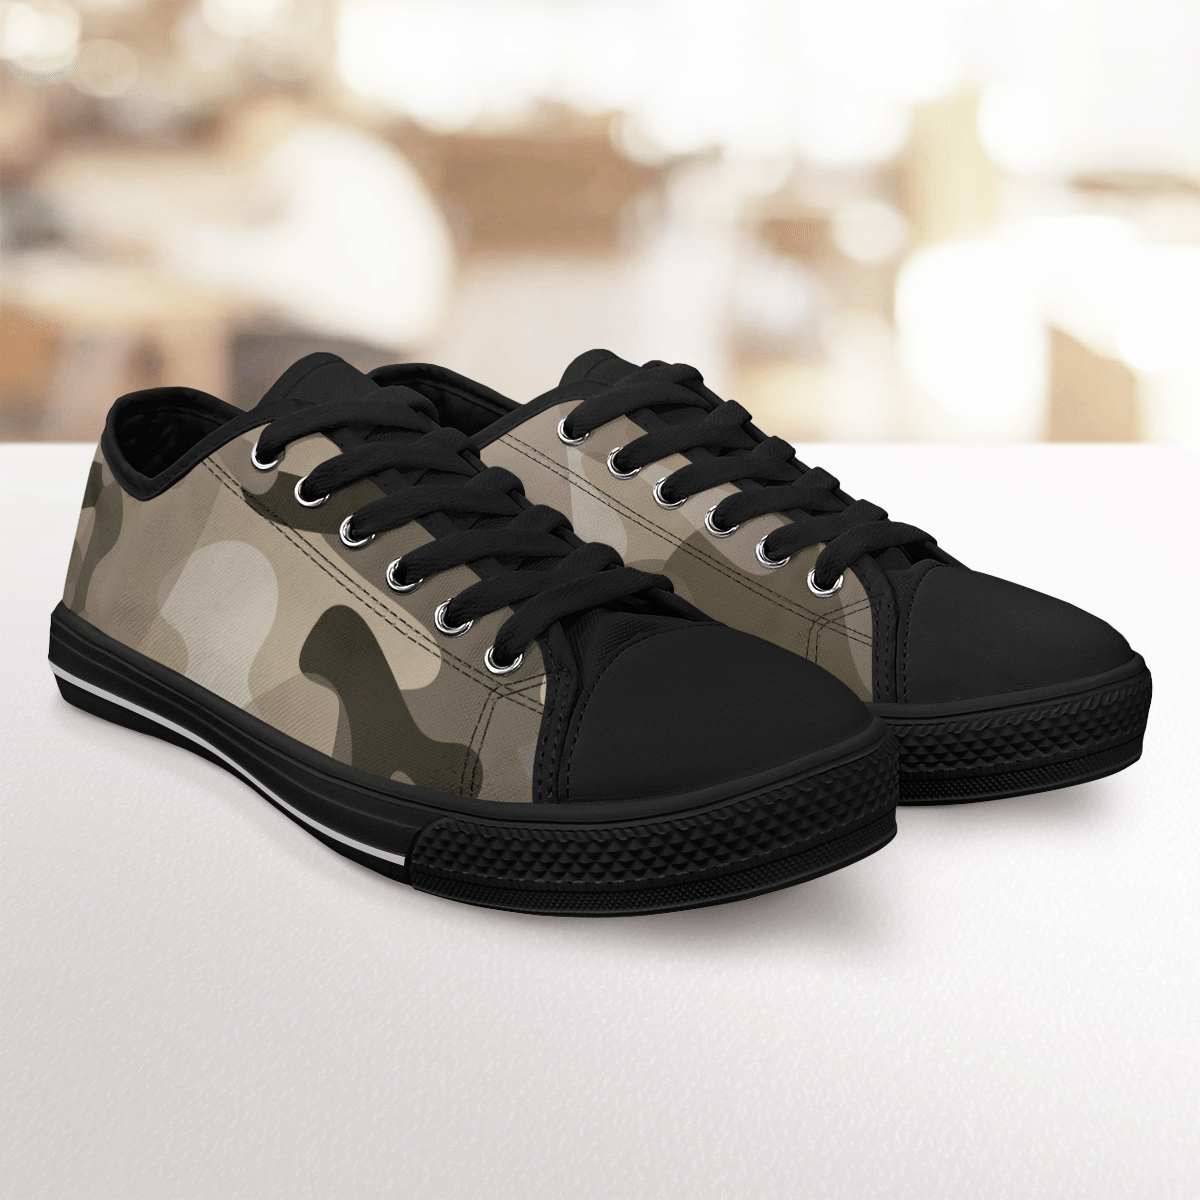 VCERTHDF Print Trendy Military Multicam Camouflage Low Top Canvas Sneakers